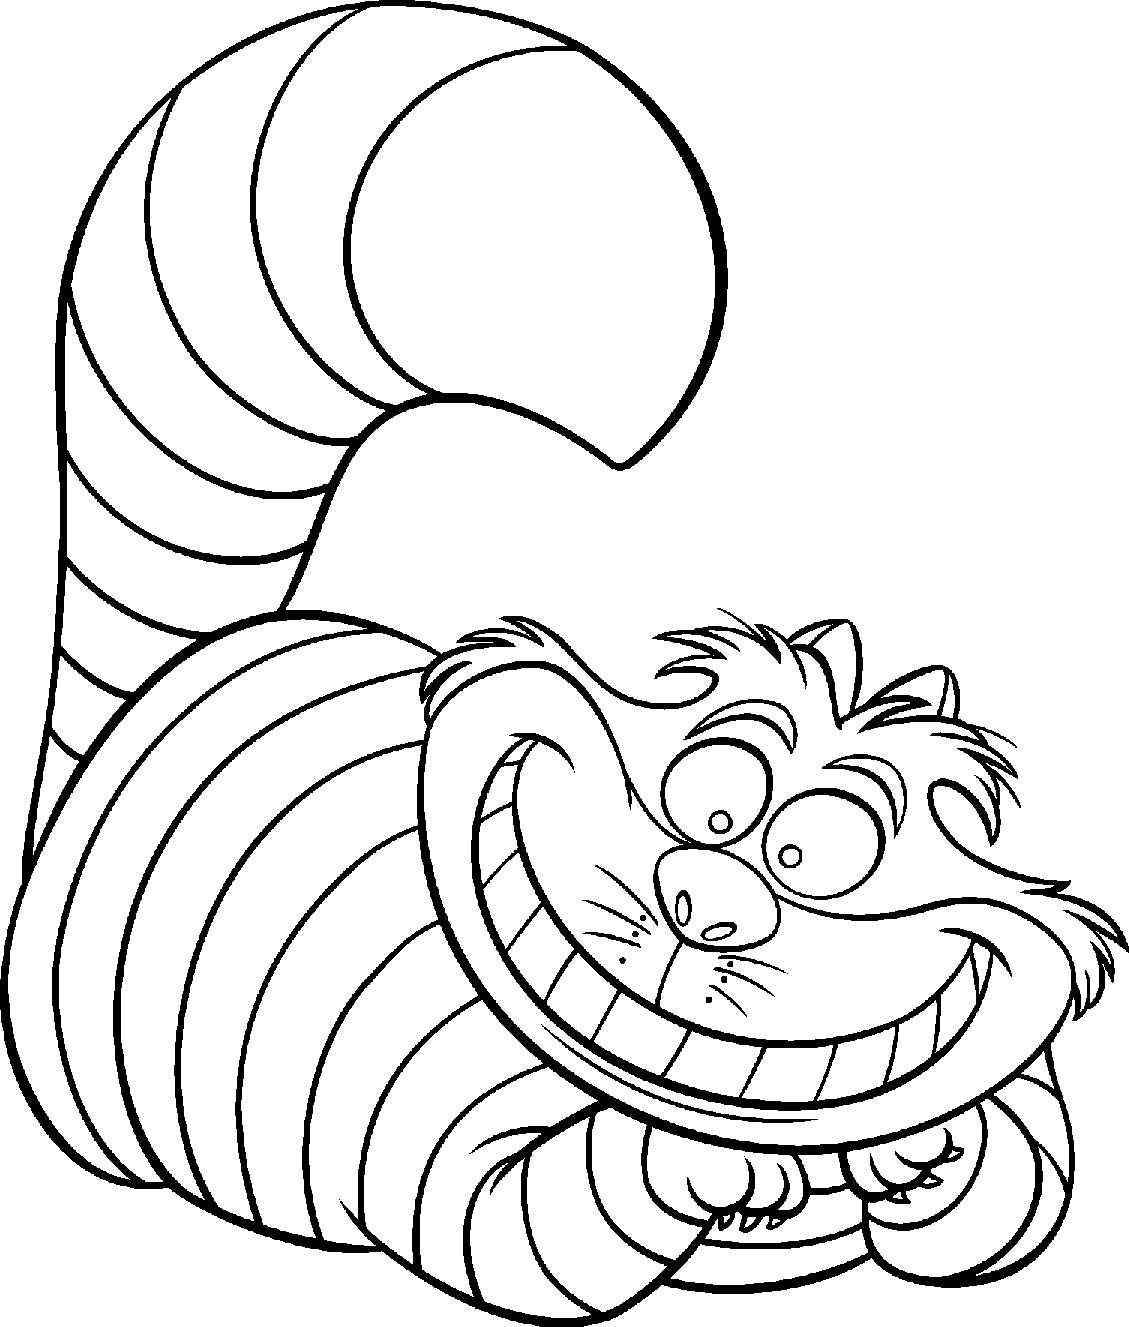 Cool Coloring Books For Kids
 Free Printable Funny Coloring Pages For Kids